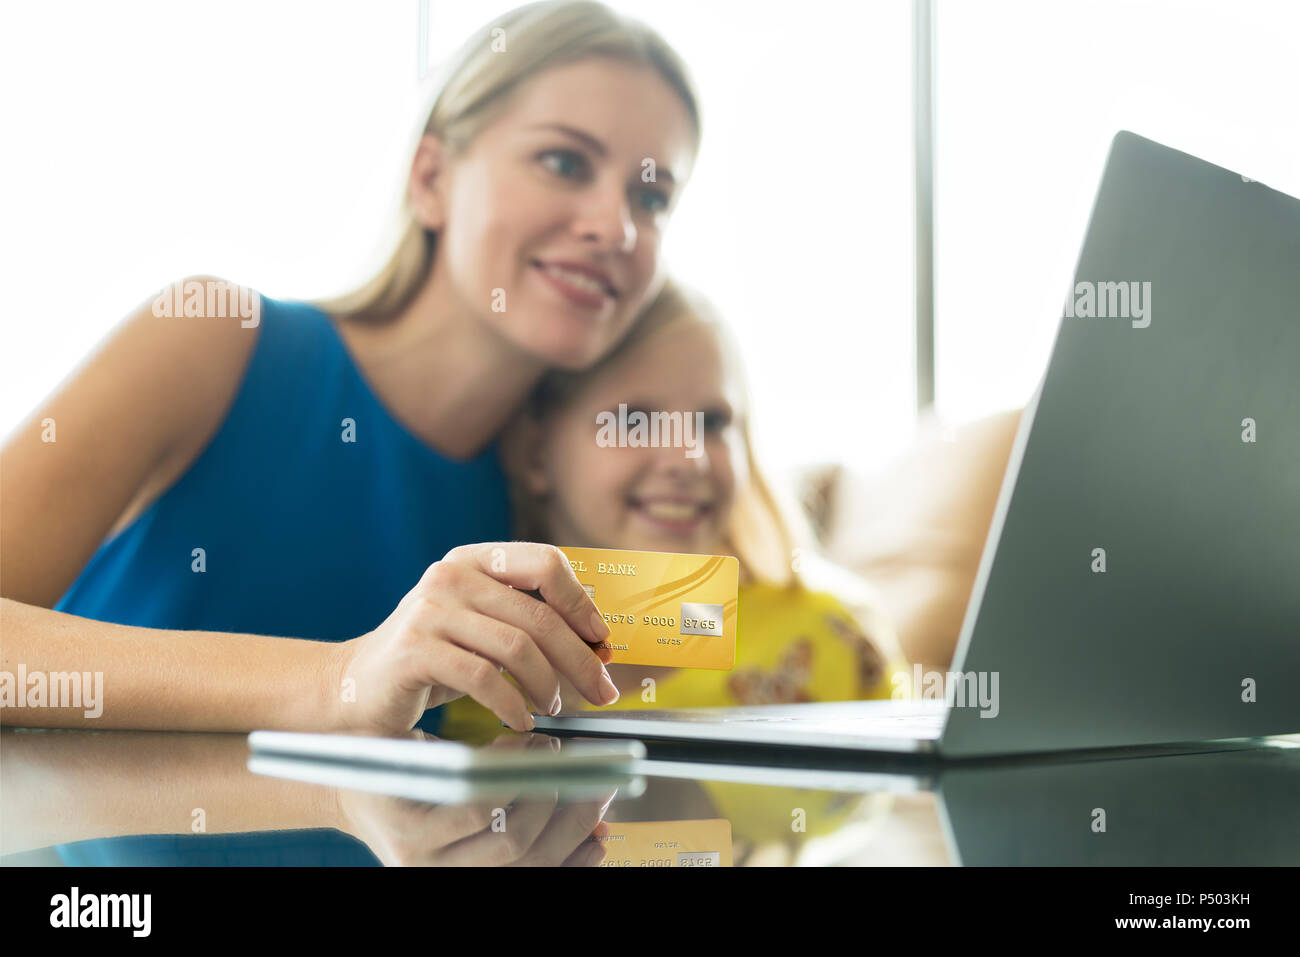 Mother and daughter using laptop and credit card together Stock Photo